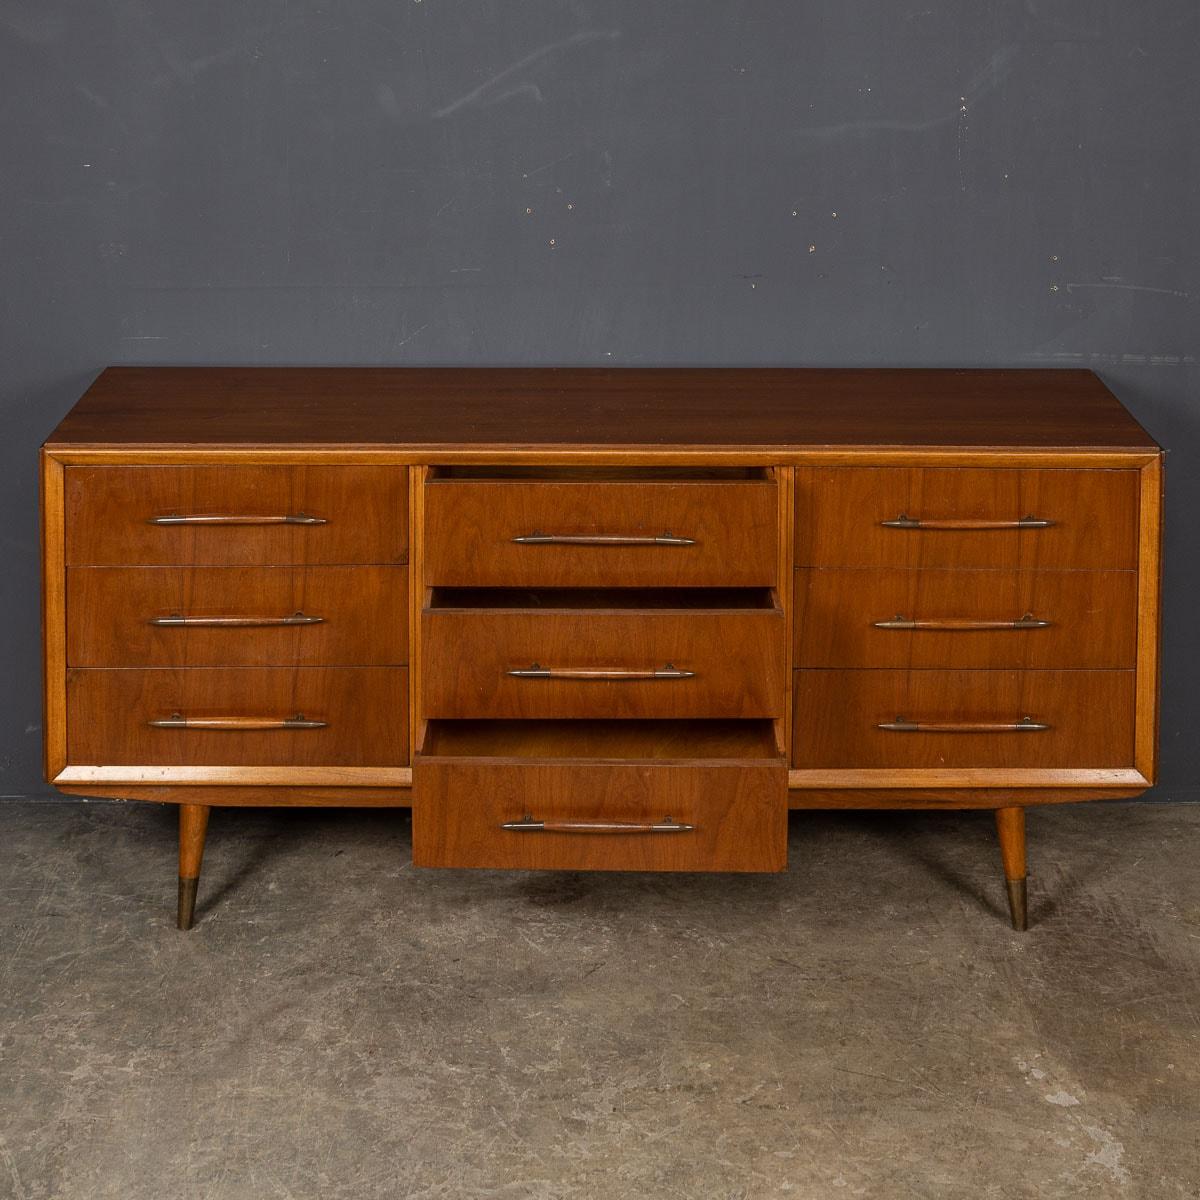 20th Century Italian Credenza With Brass Handles, c.1950 For Sale 2